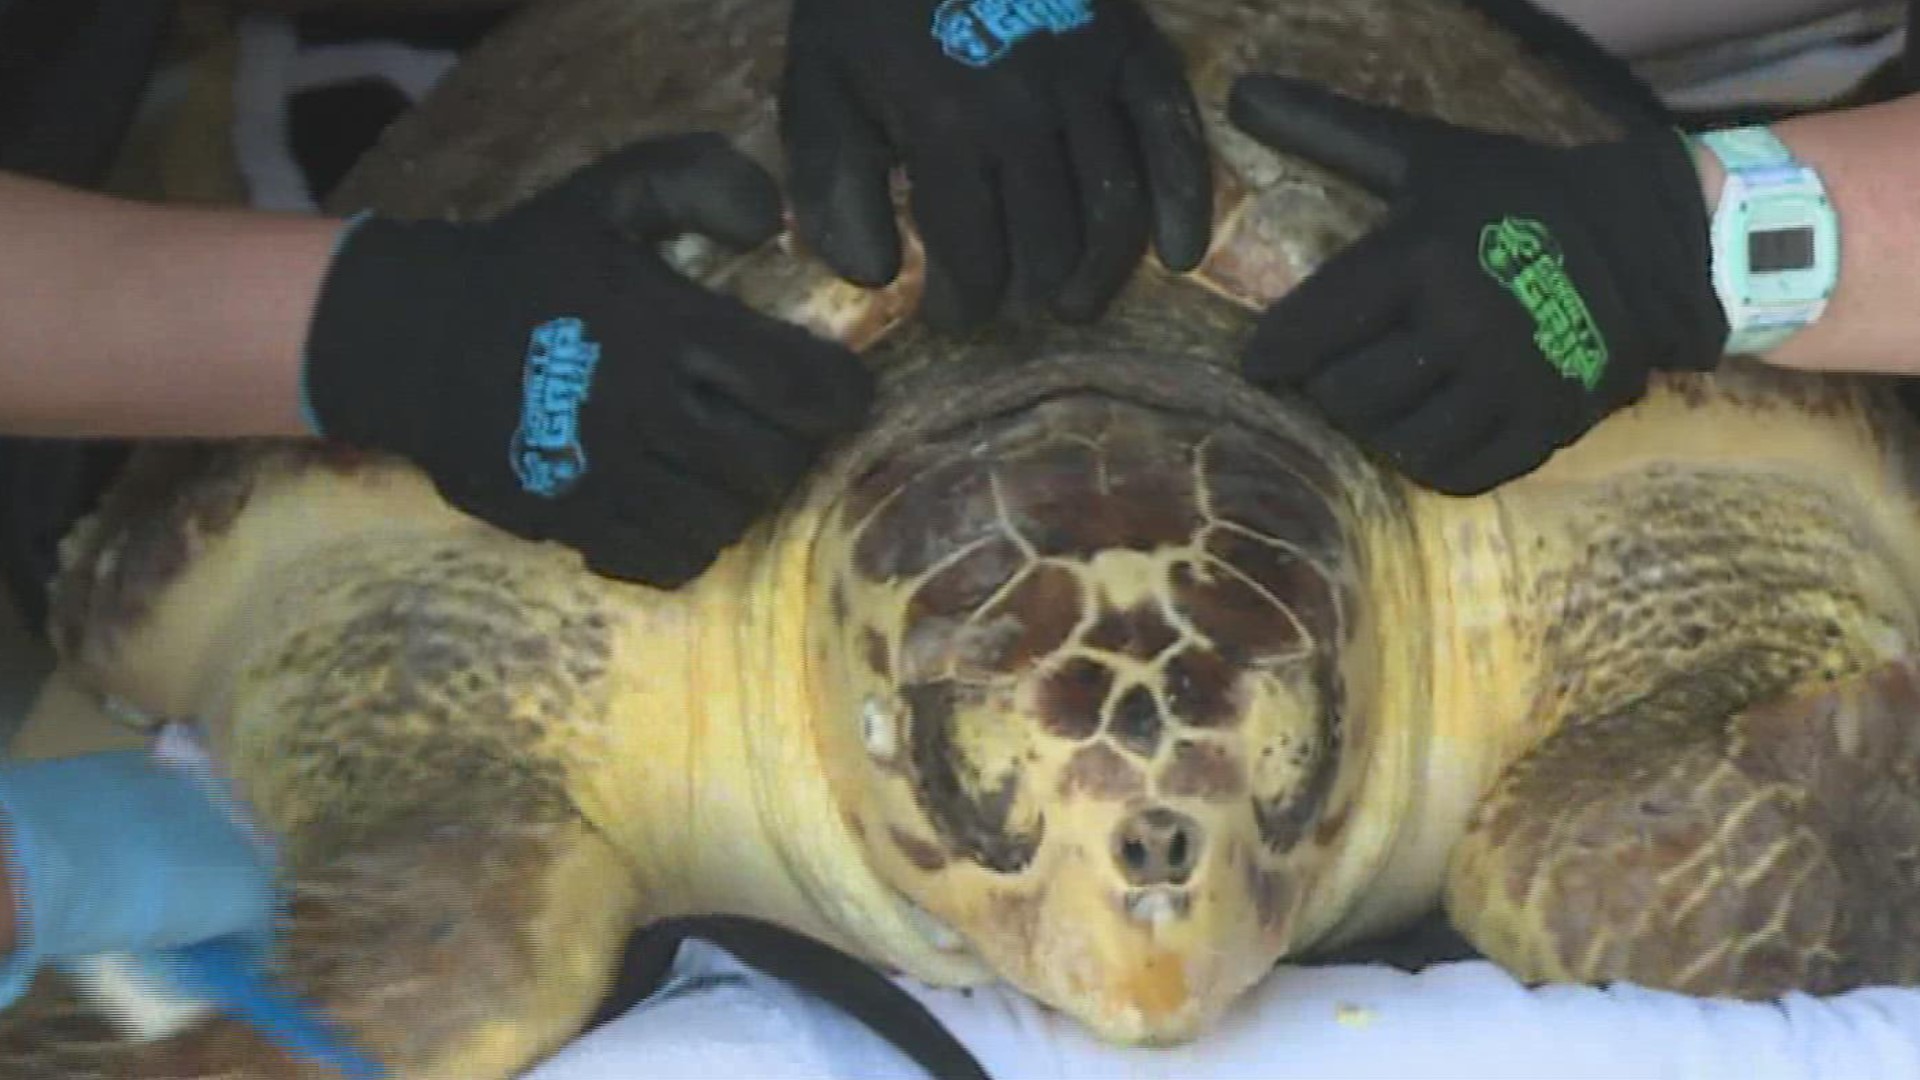 The exact cause of the turtle stranding's is still unknown, but ARK Program Coordinator Alicia Walker says it appears the diet of the turtles is a factor.